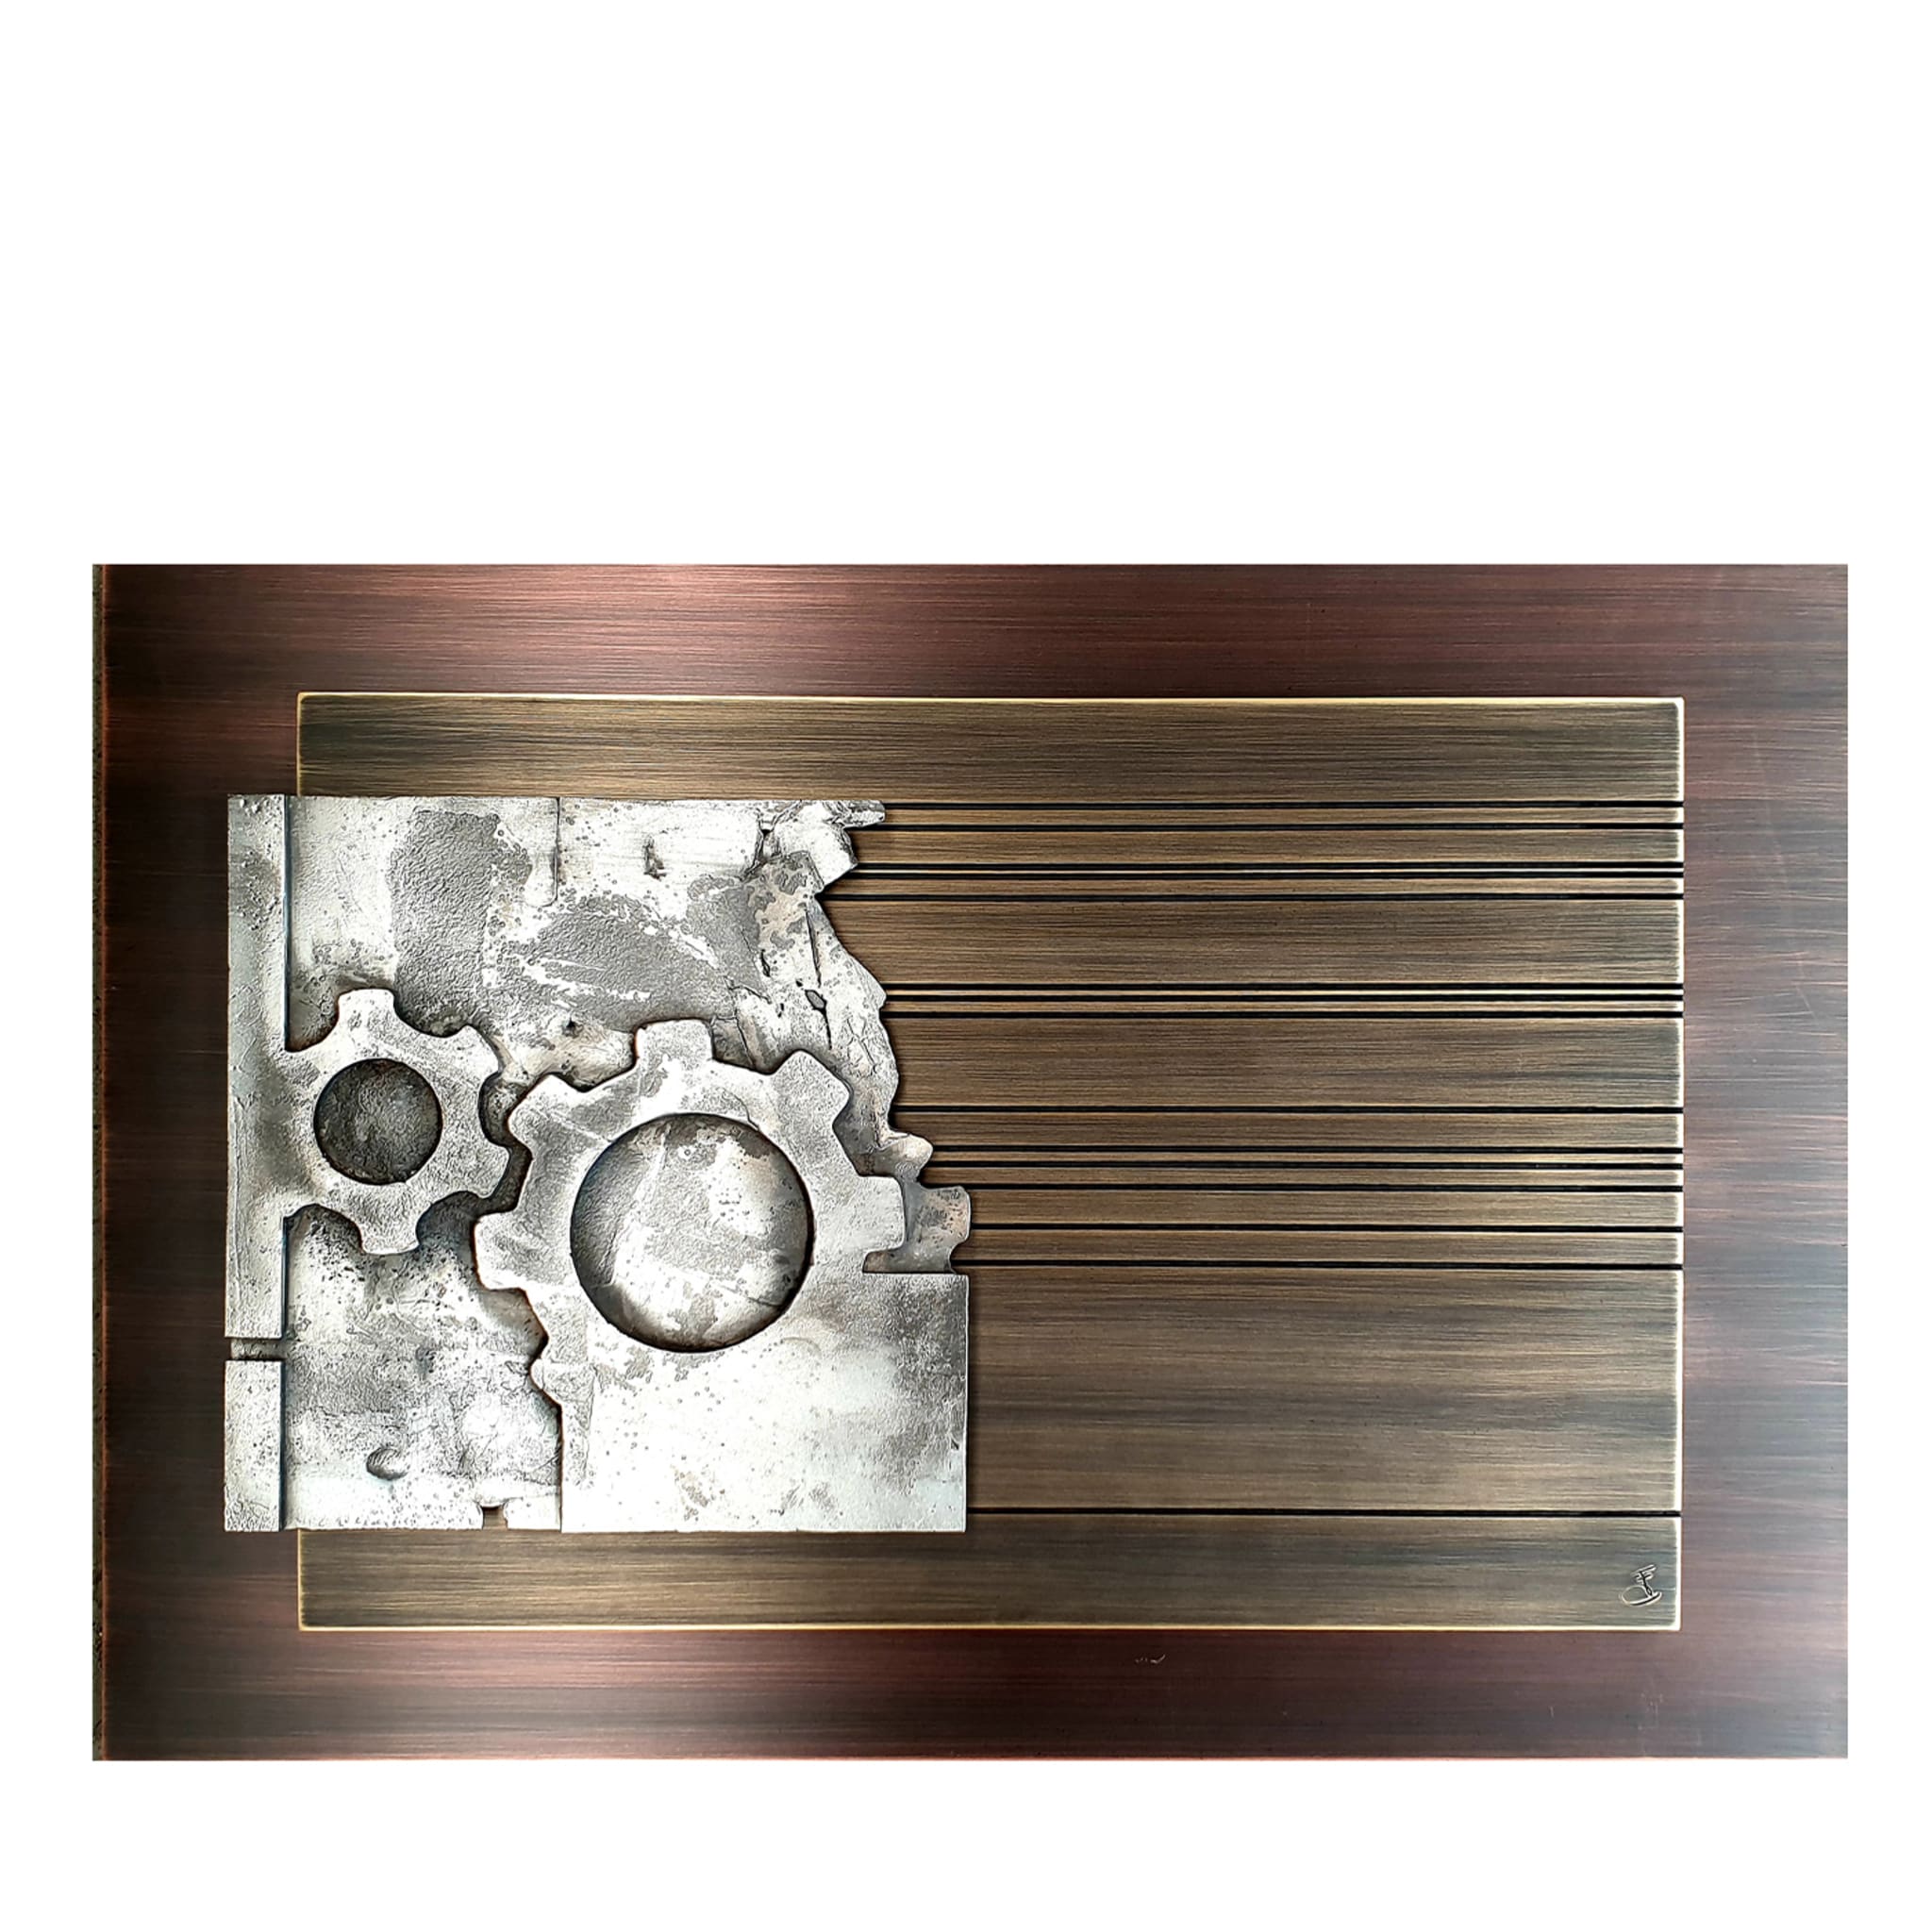 Meccanismo Metal Wall Sculpture by Davide Foletti - Main view